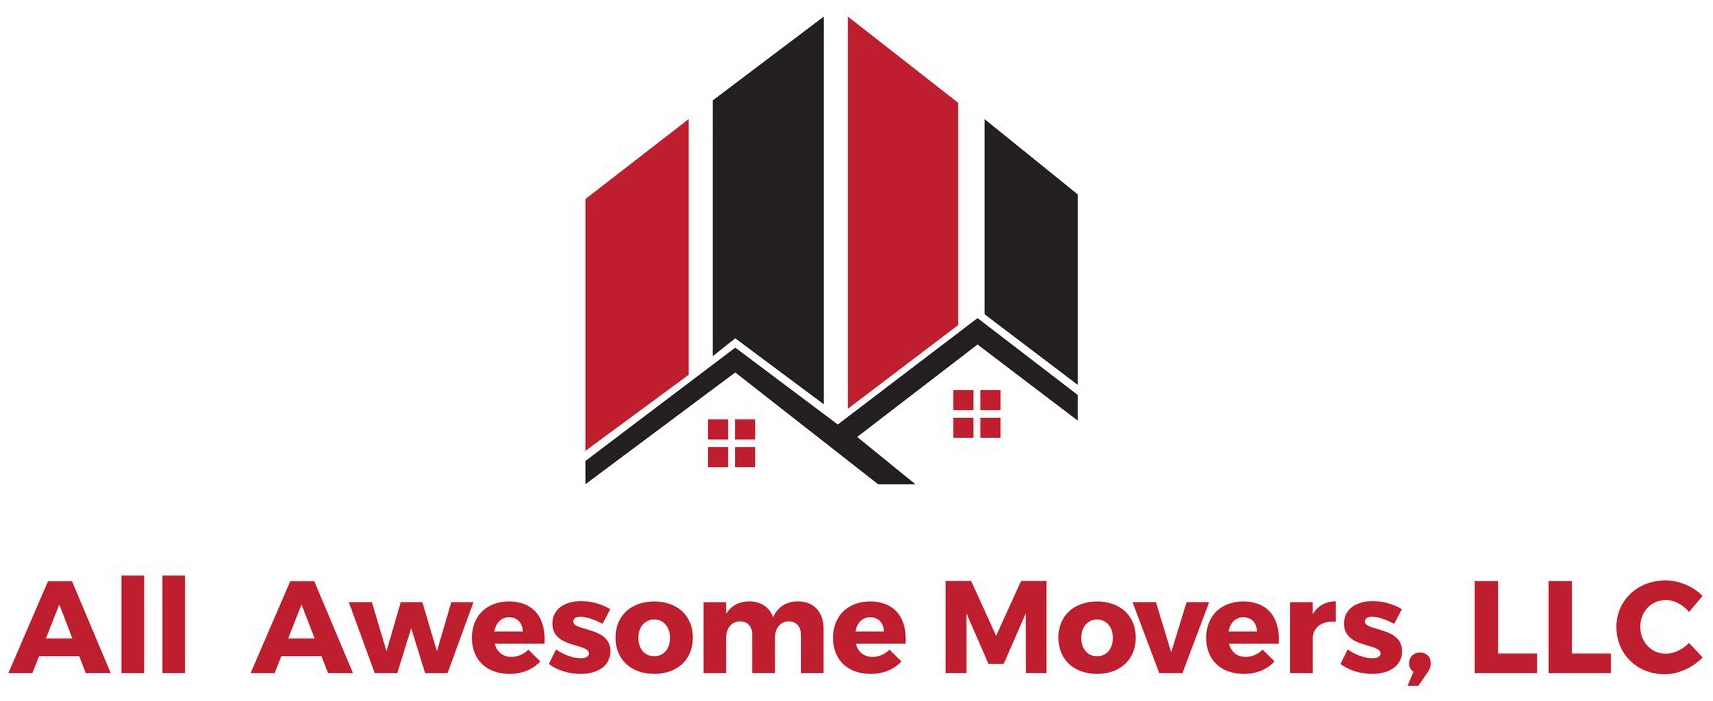 All Awesome Movers Logo